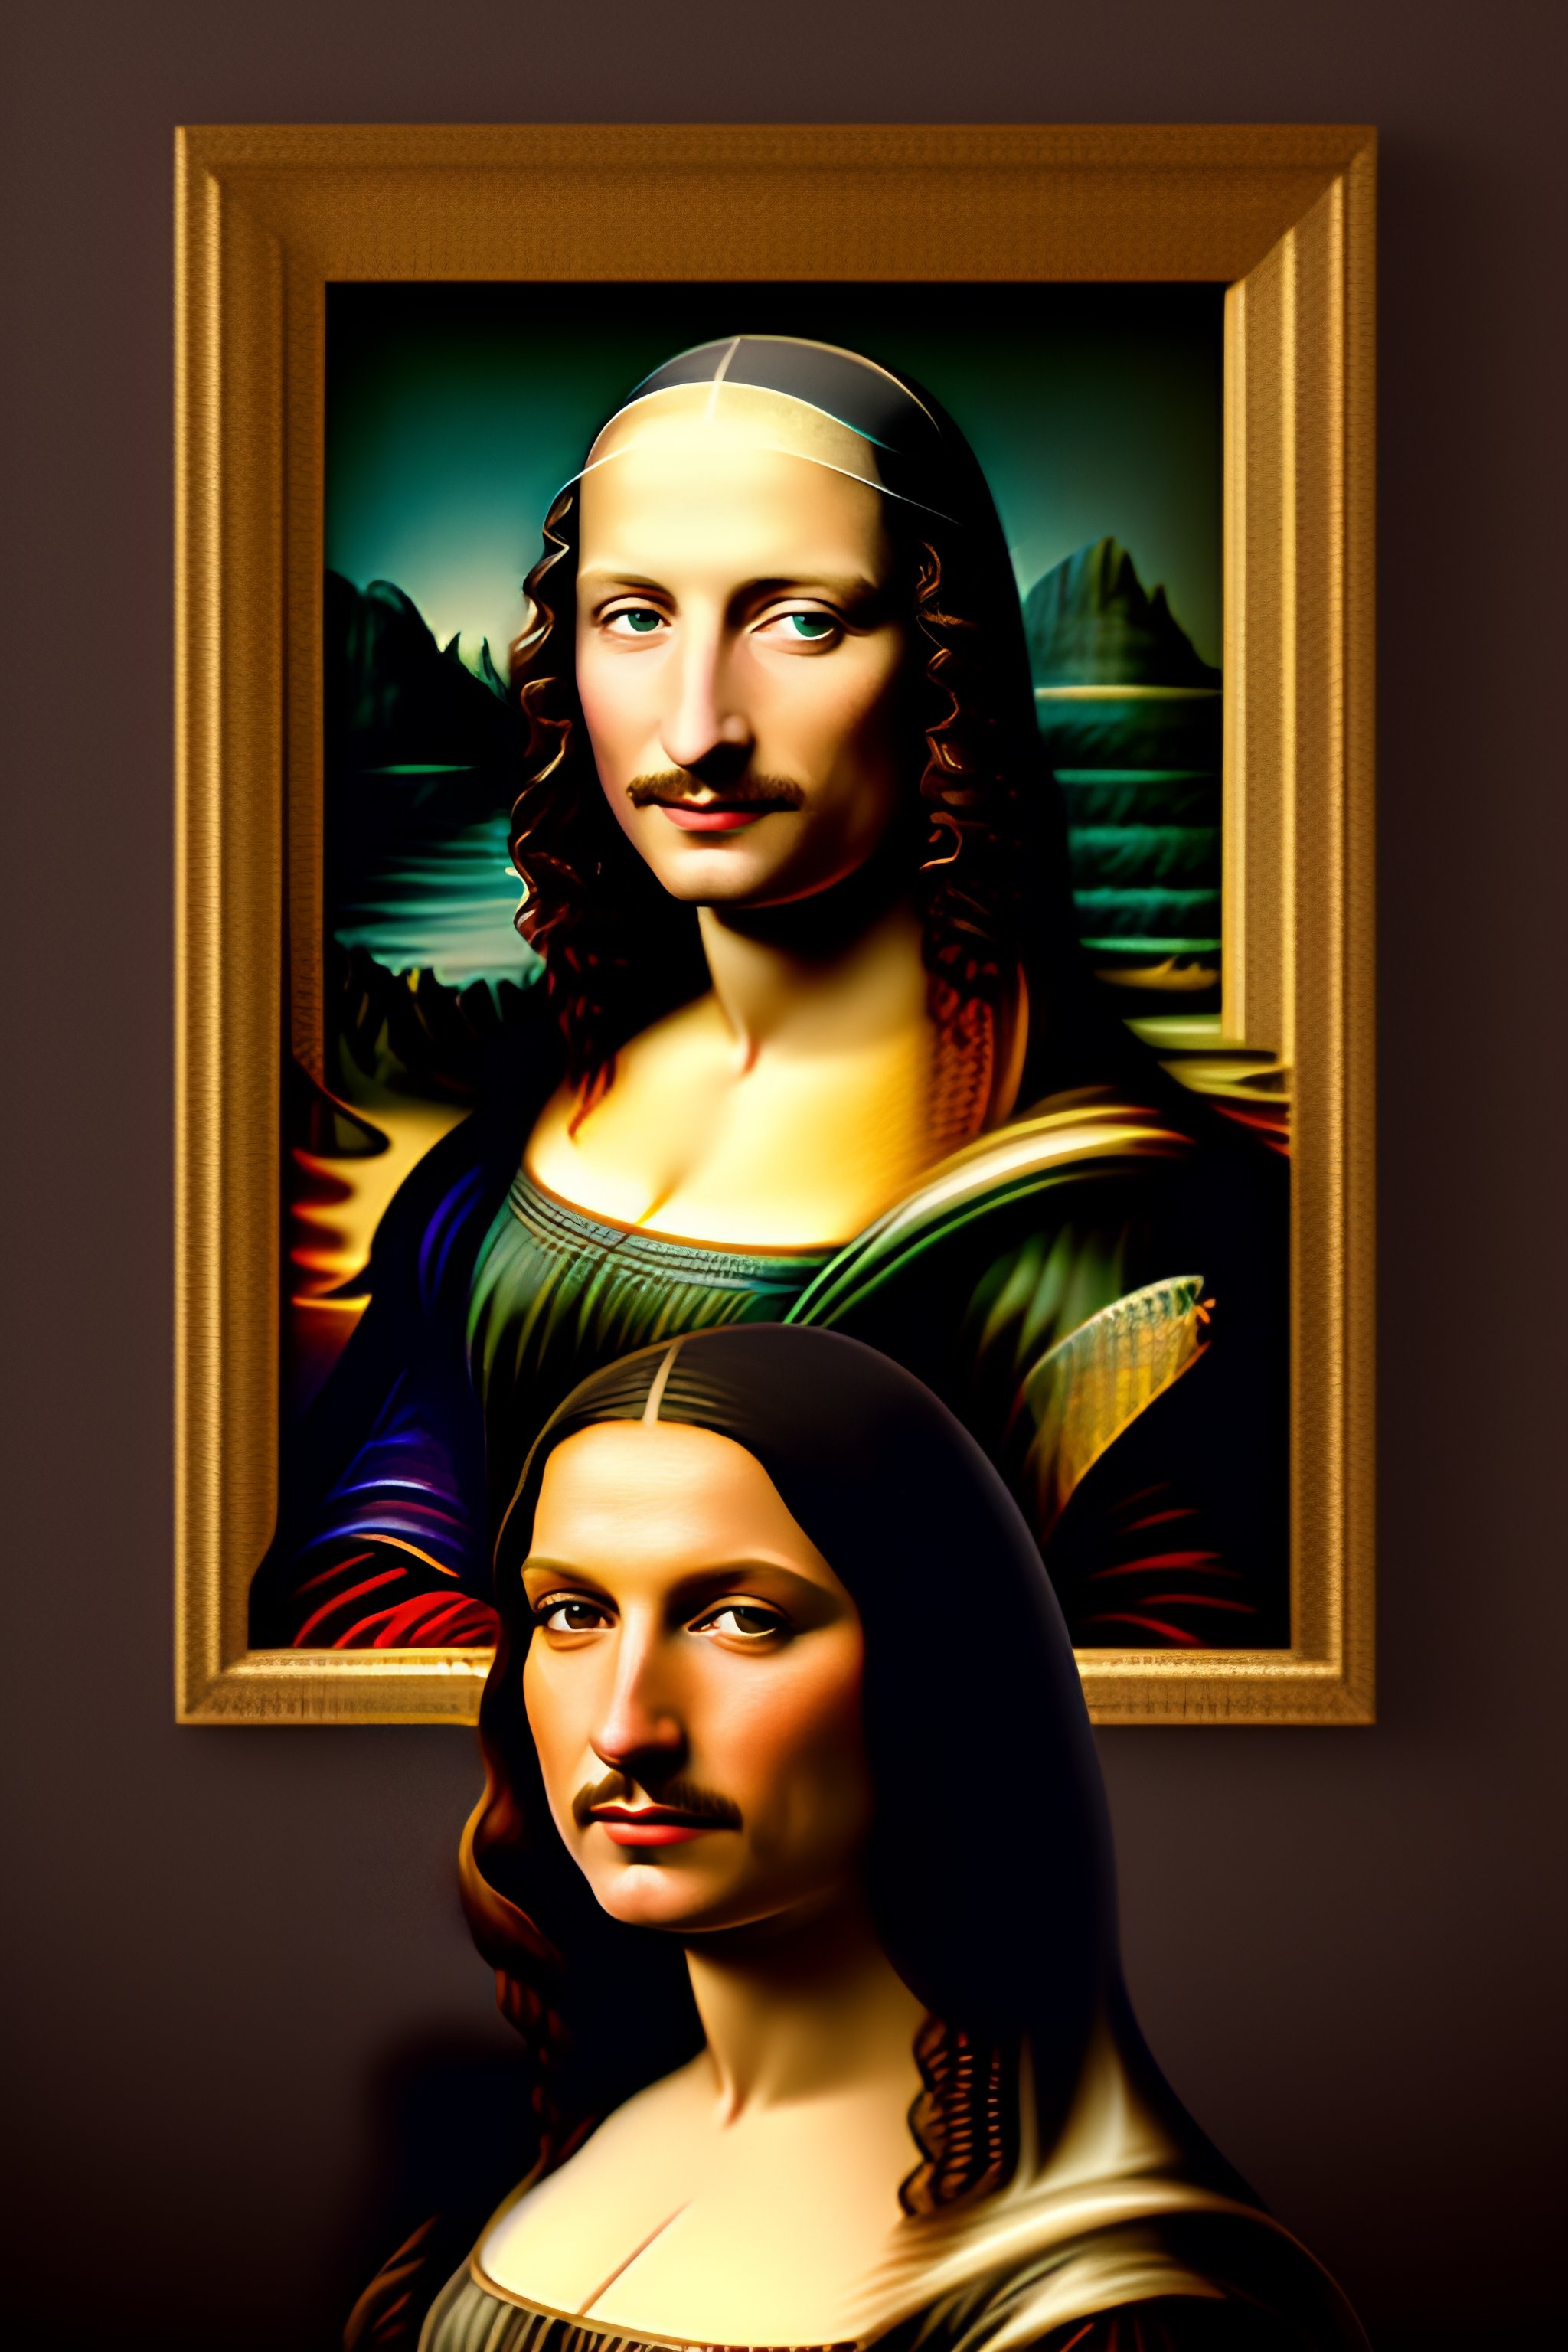 The bald Monalisa painting editorial photography. Image of famous